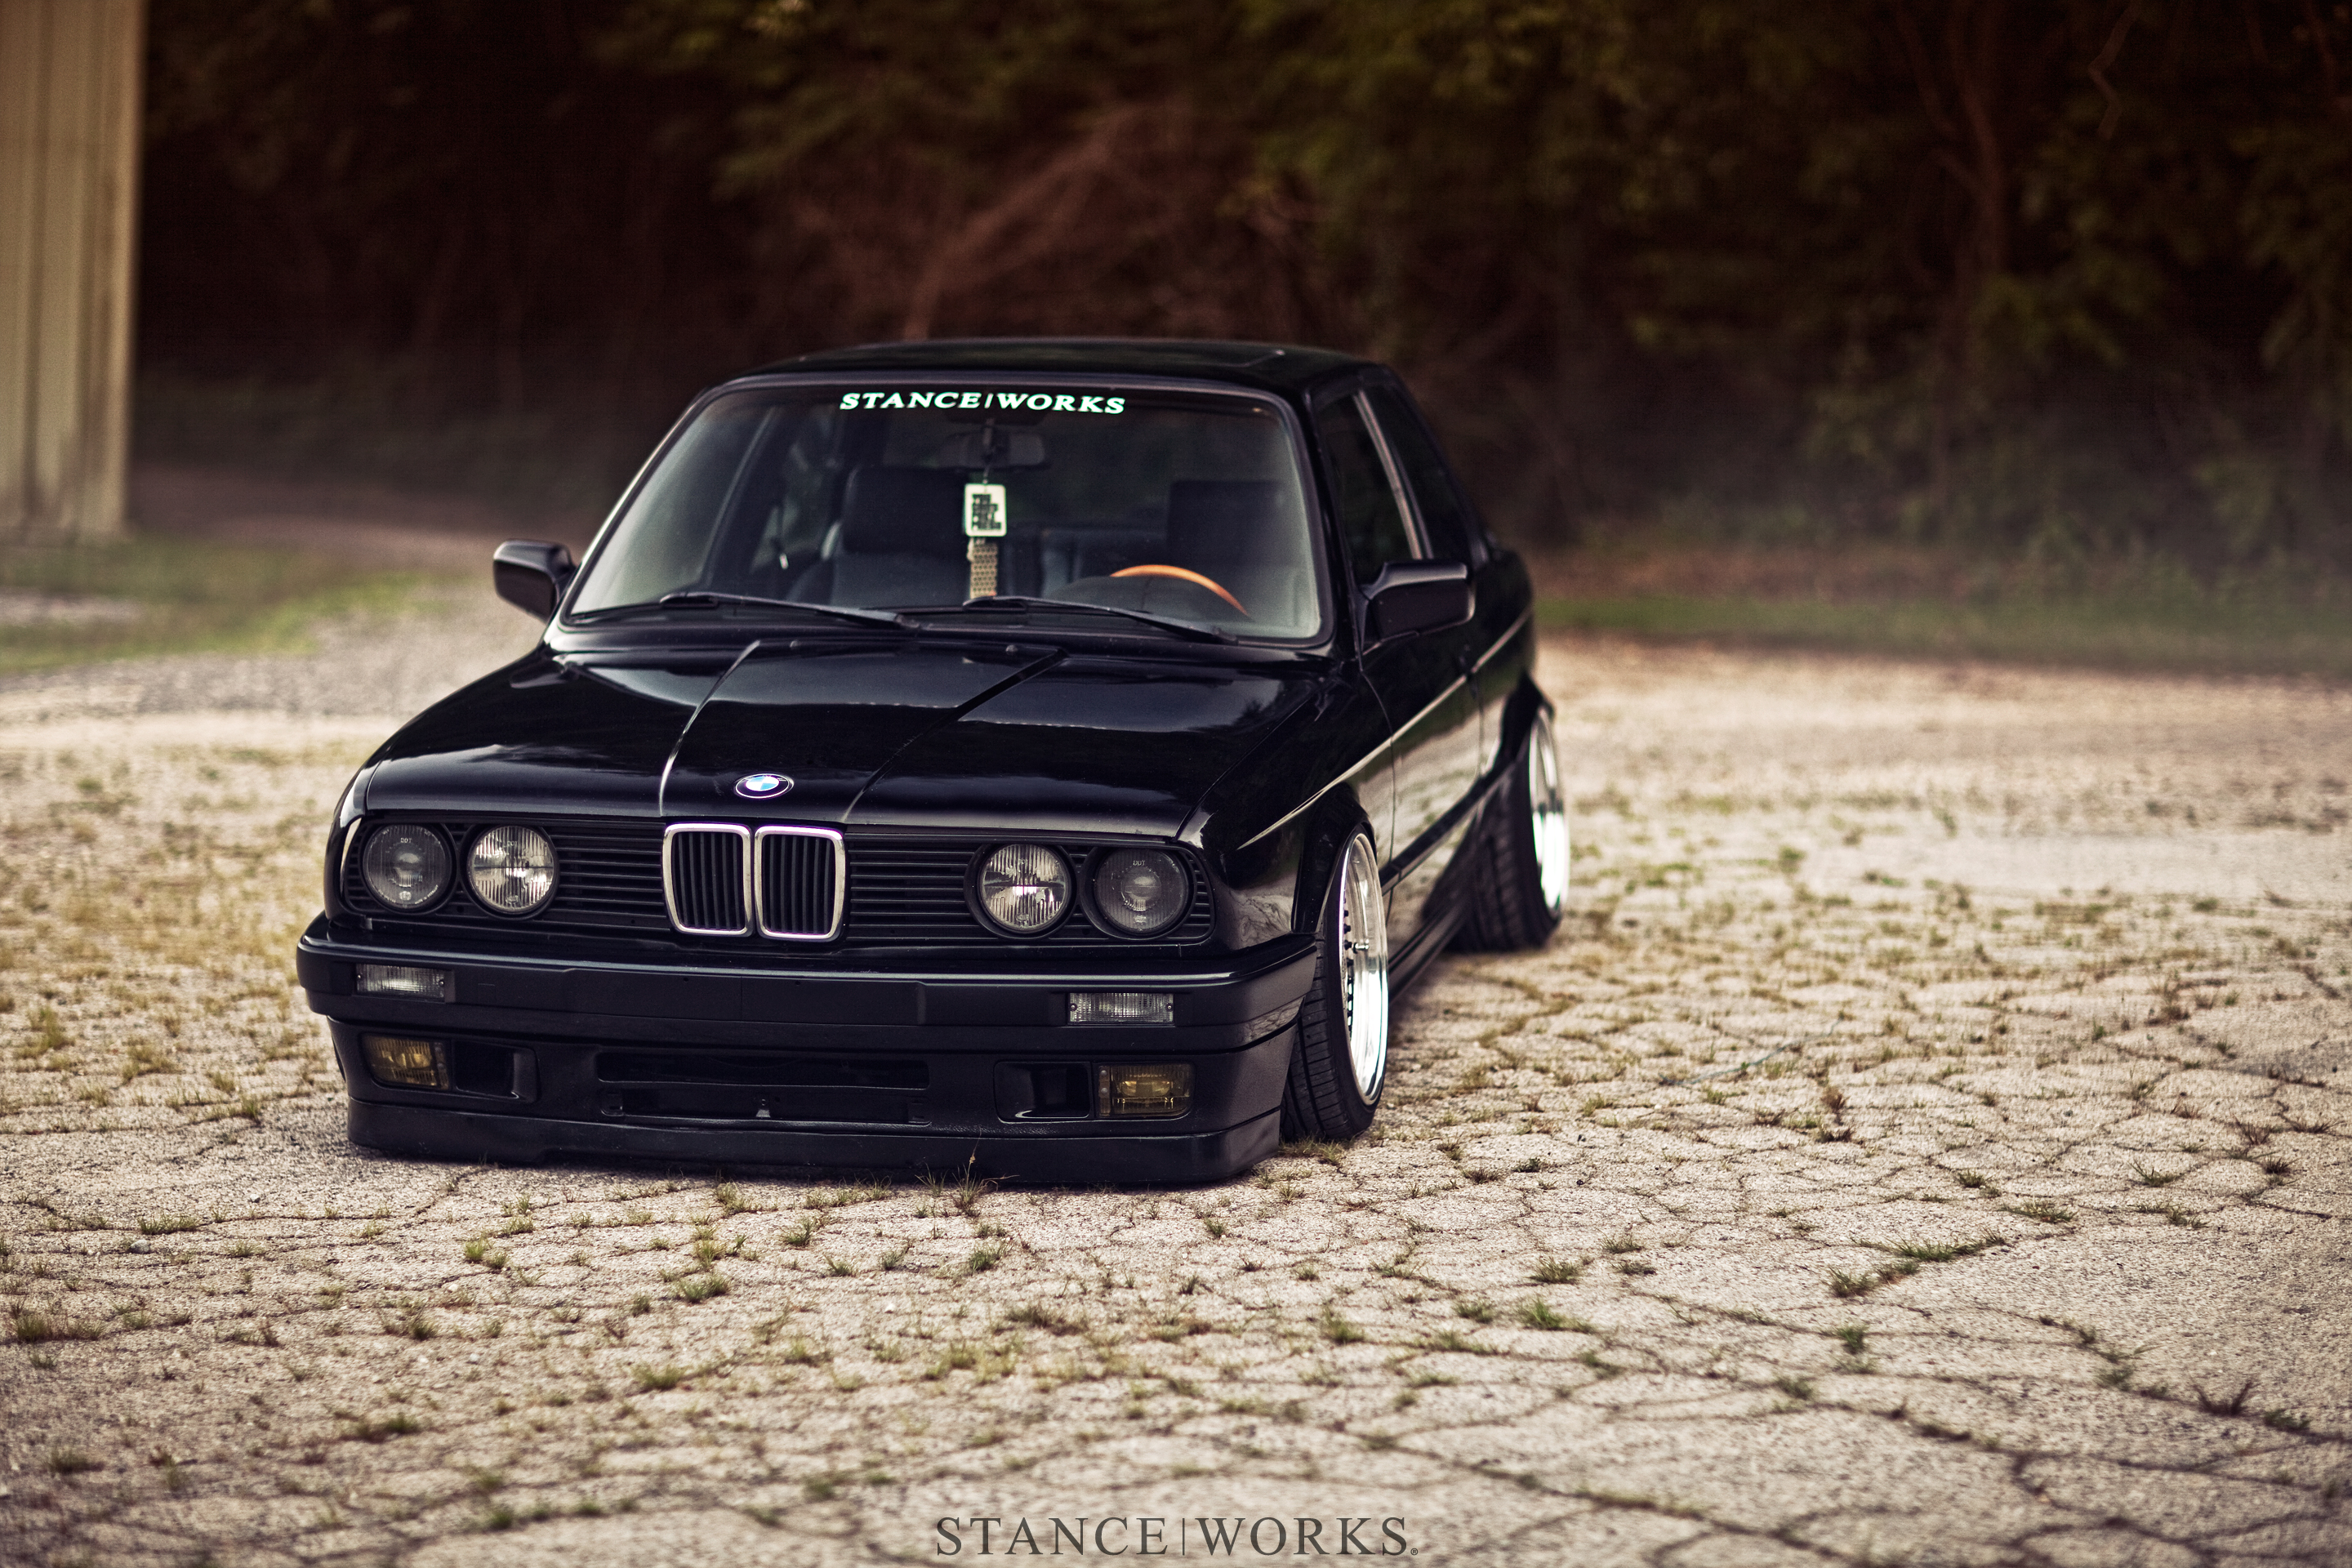 Stanceworks Wallpaper Rion Morse S Beautiful E30 Stance Works